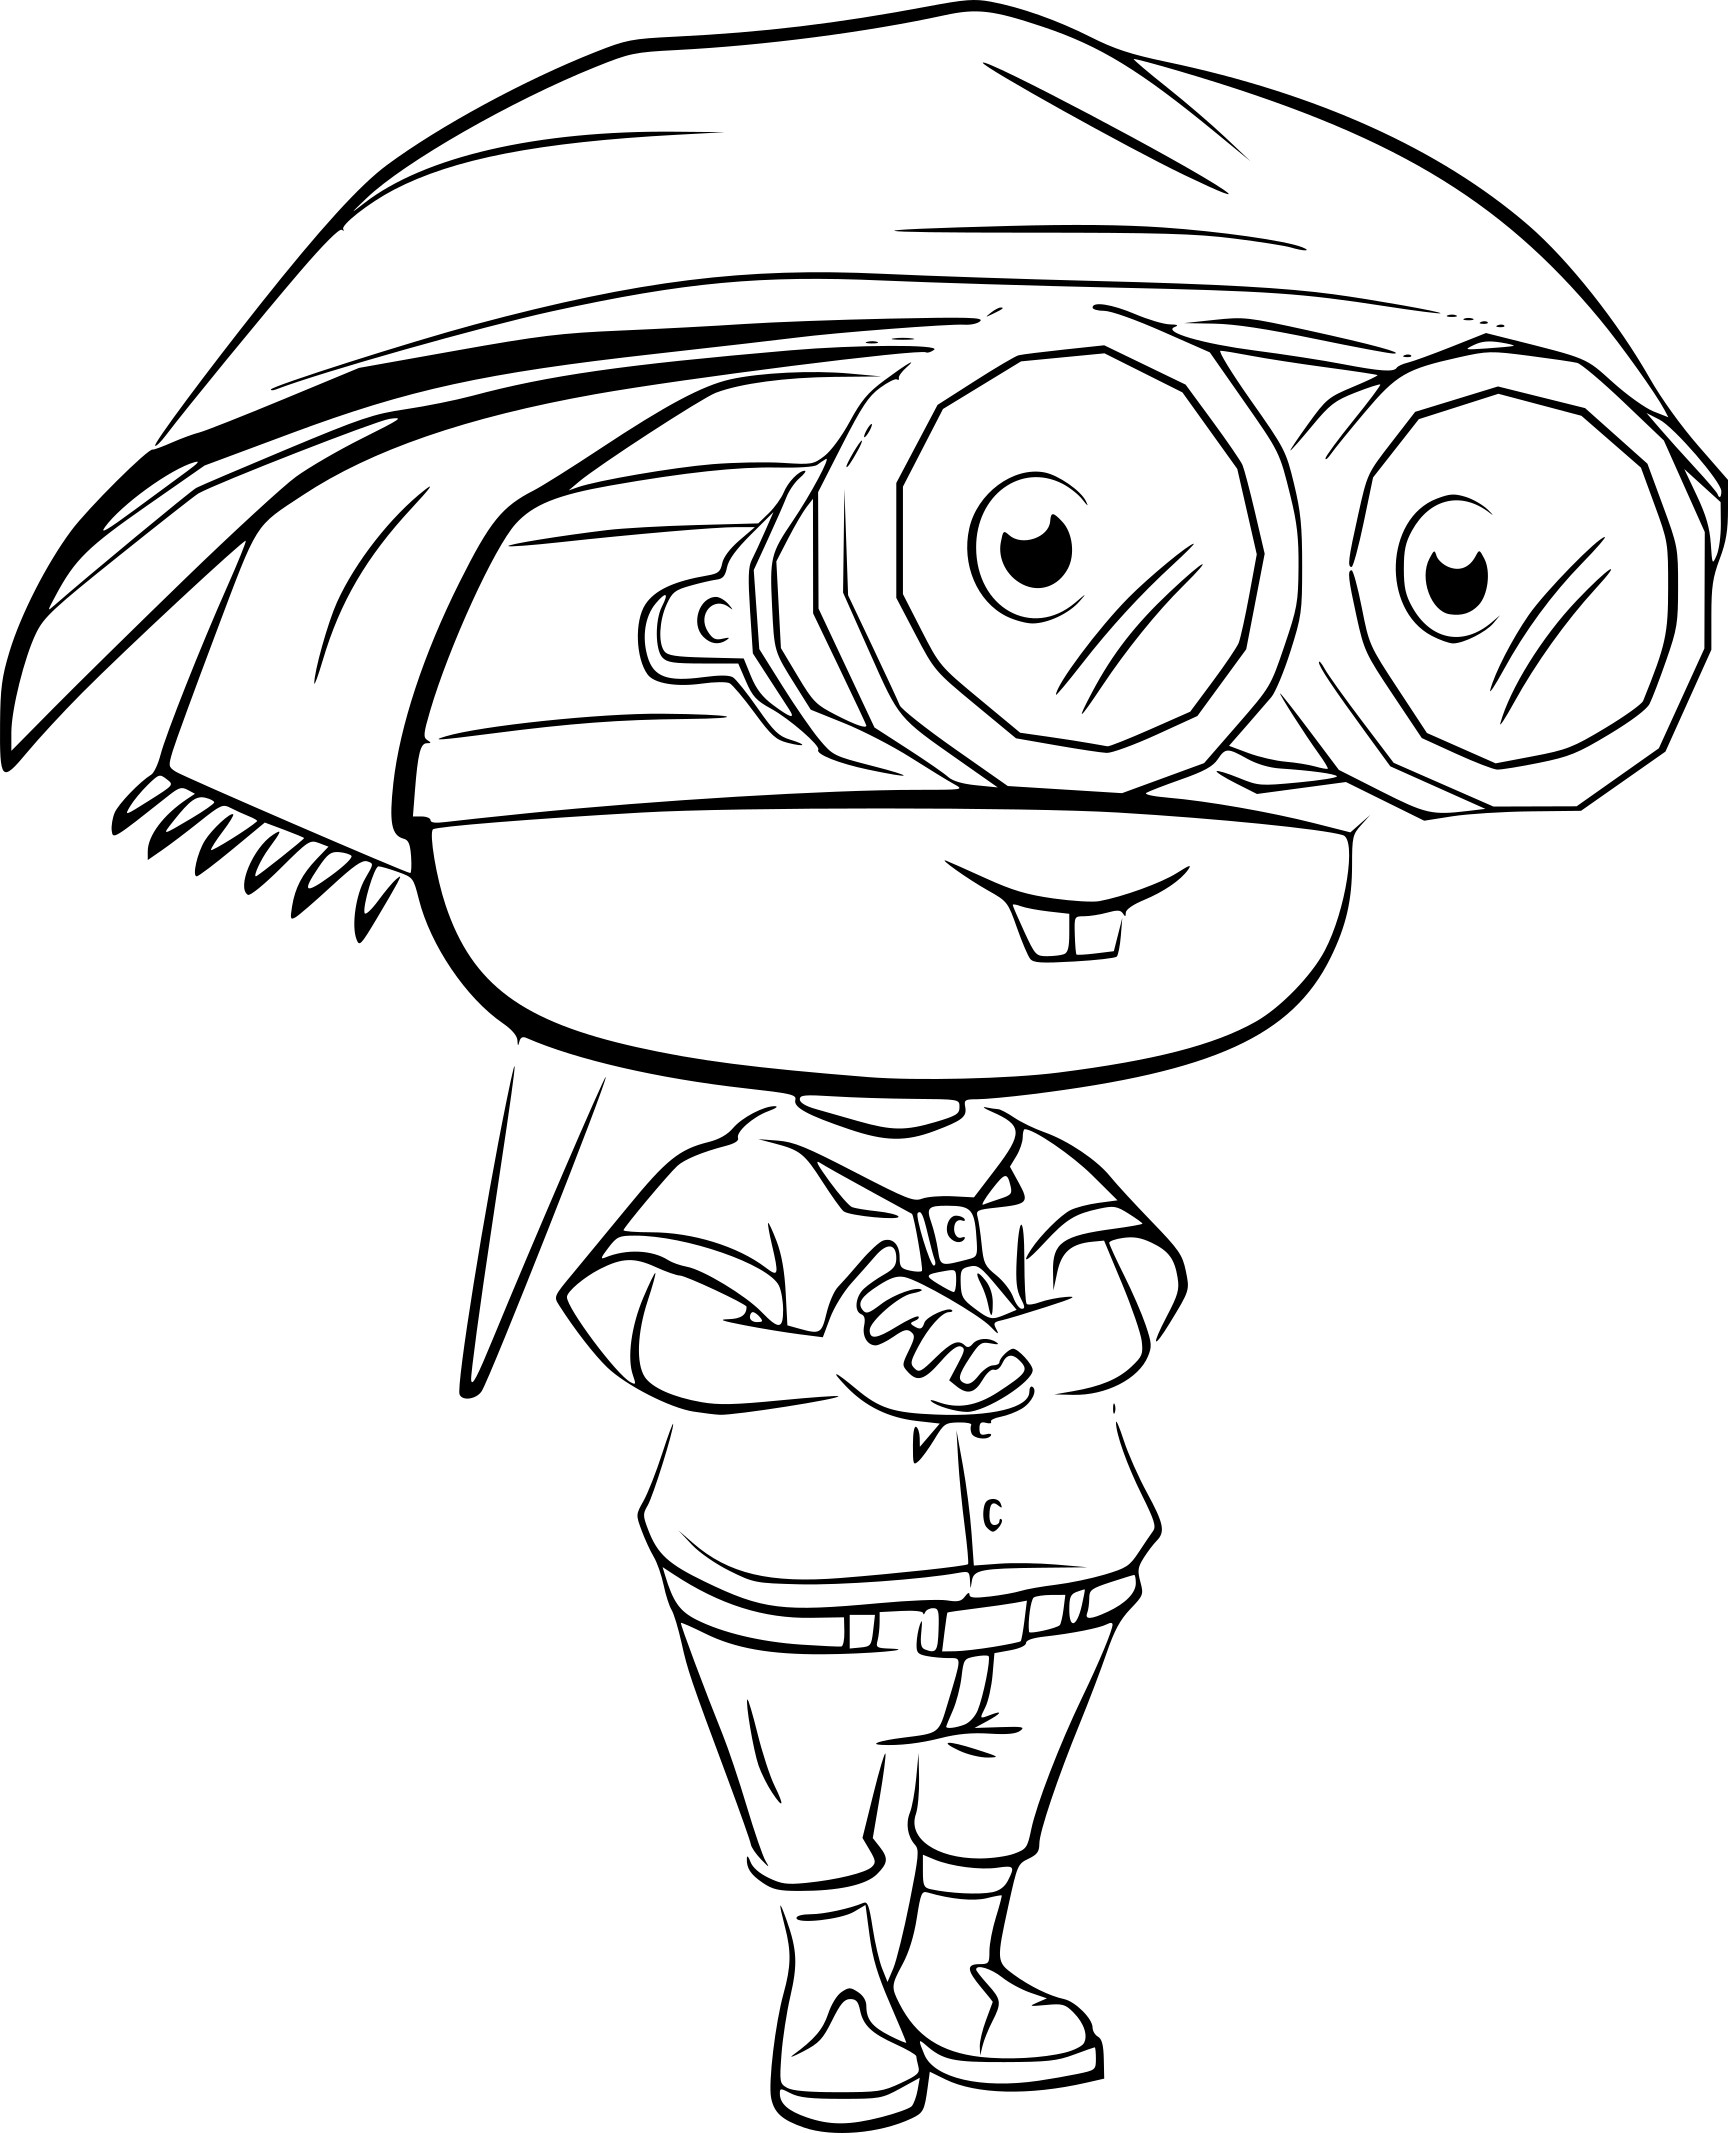 Splatoon Cartridge coloring page - free printable coloring pages on  coloori.com